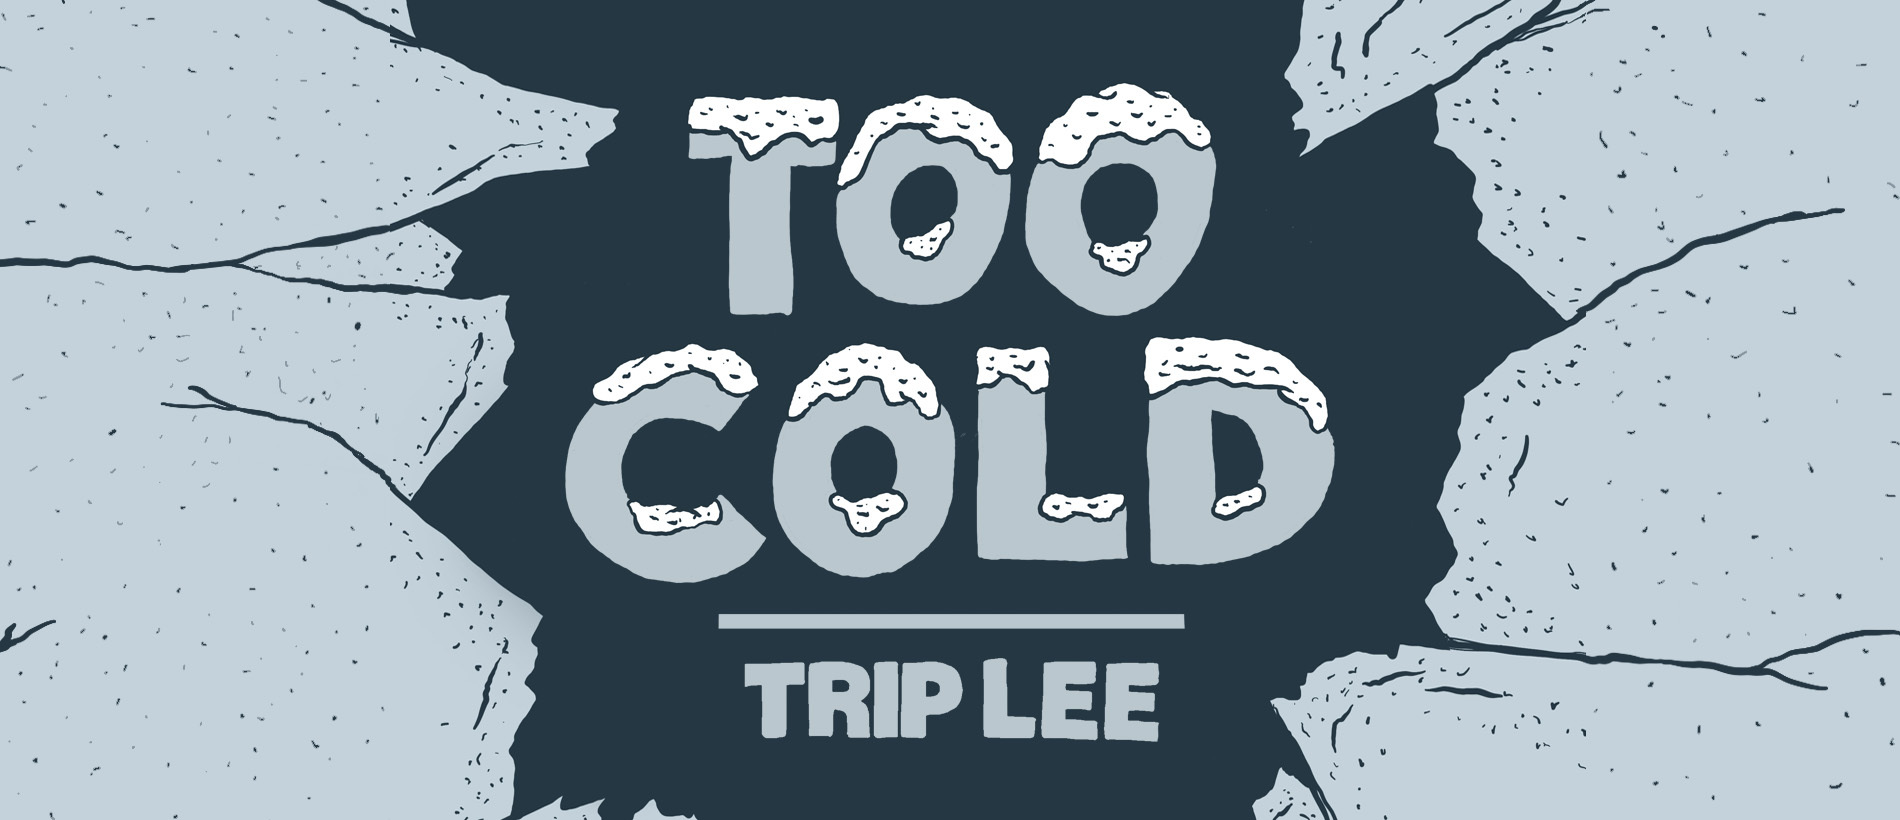 TRIP LEE RELEASES NEW SINGLE “TOO COLD”